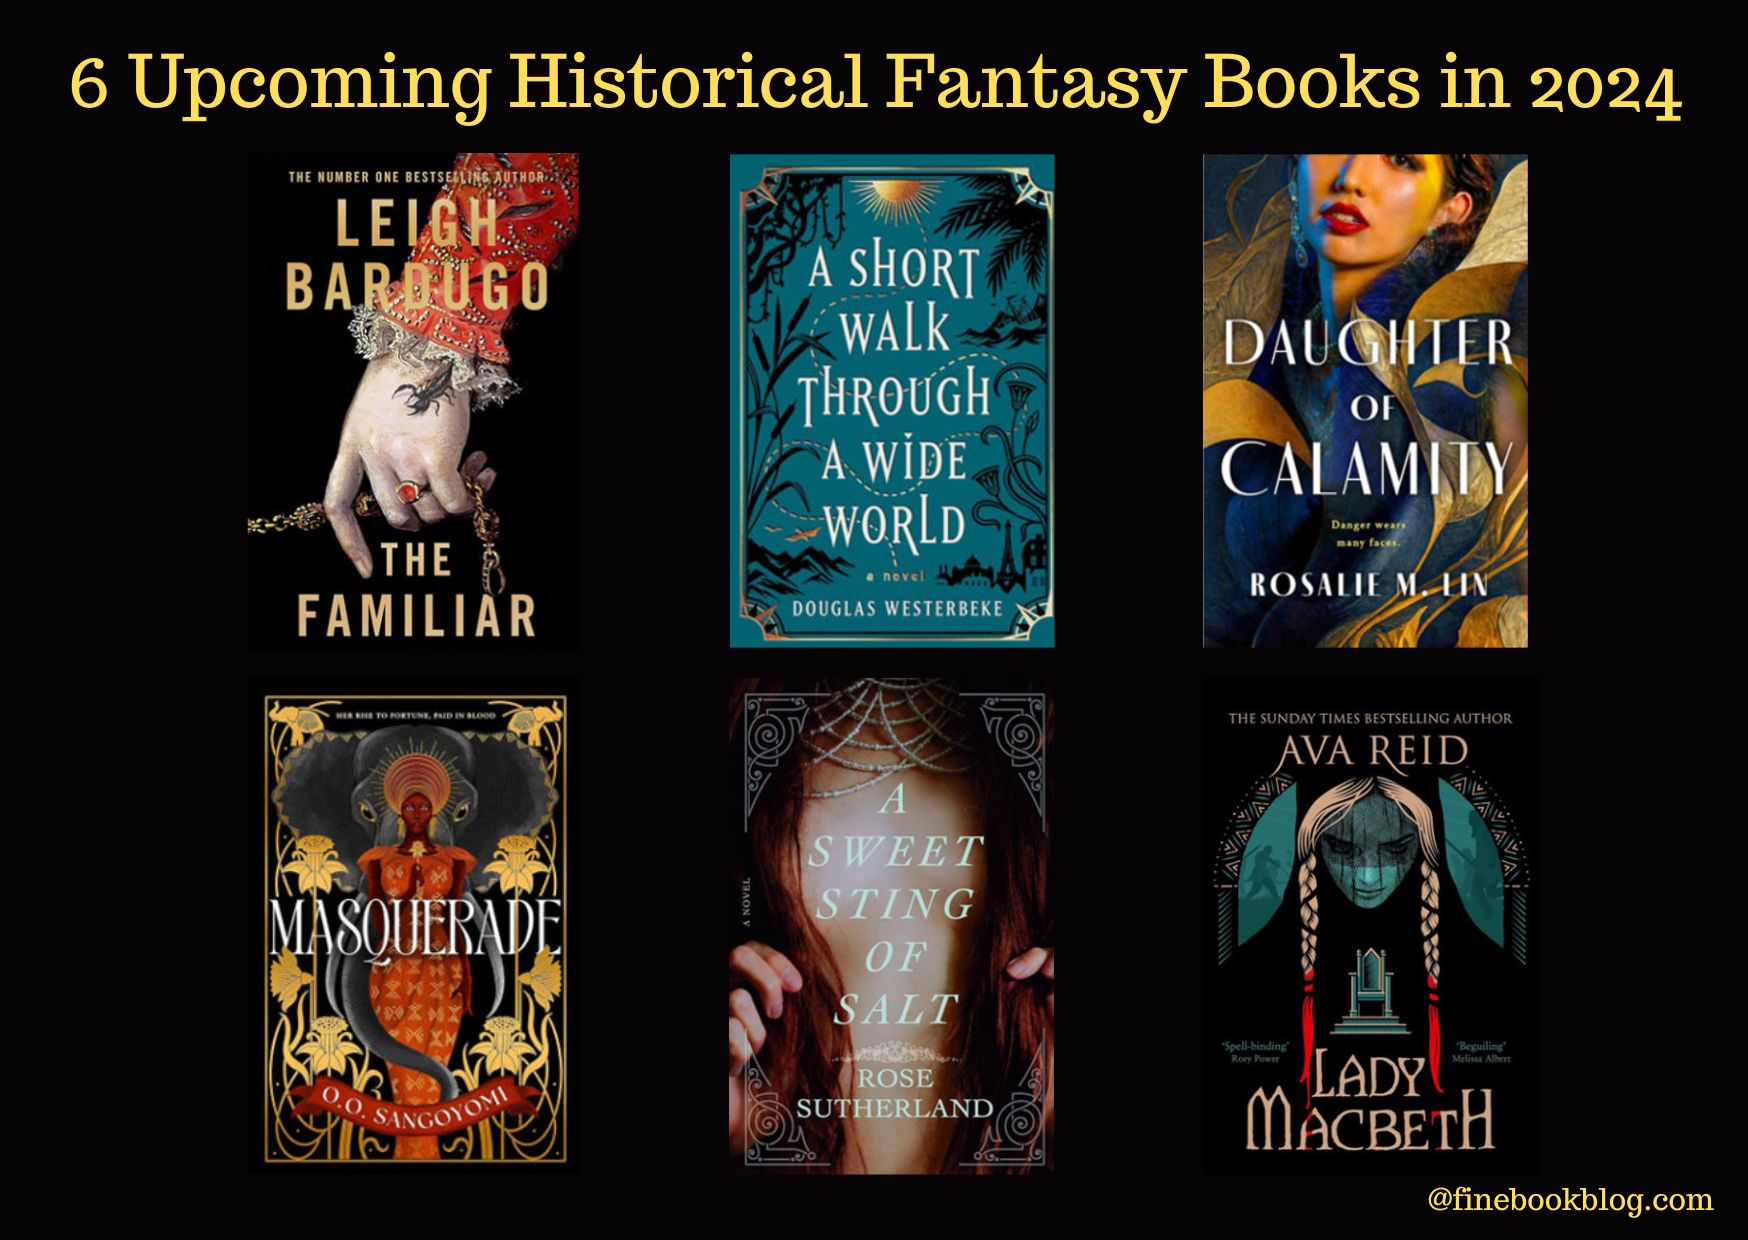 Upcoming-historical-fantasy-books-2024-new-release